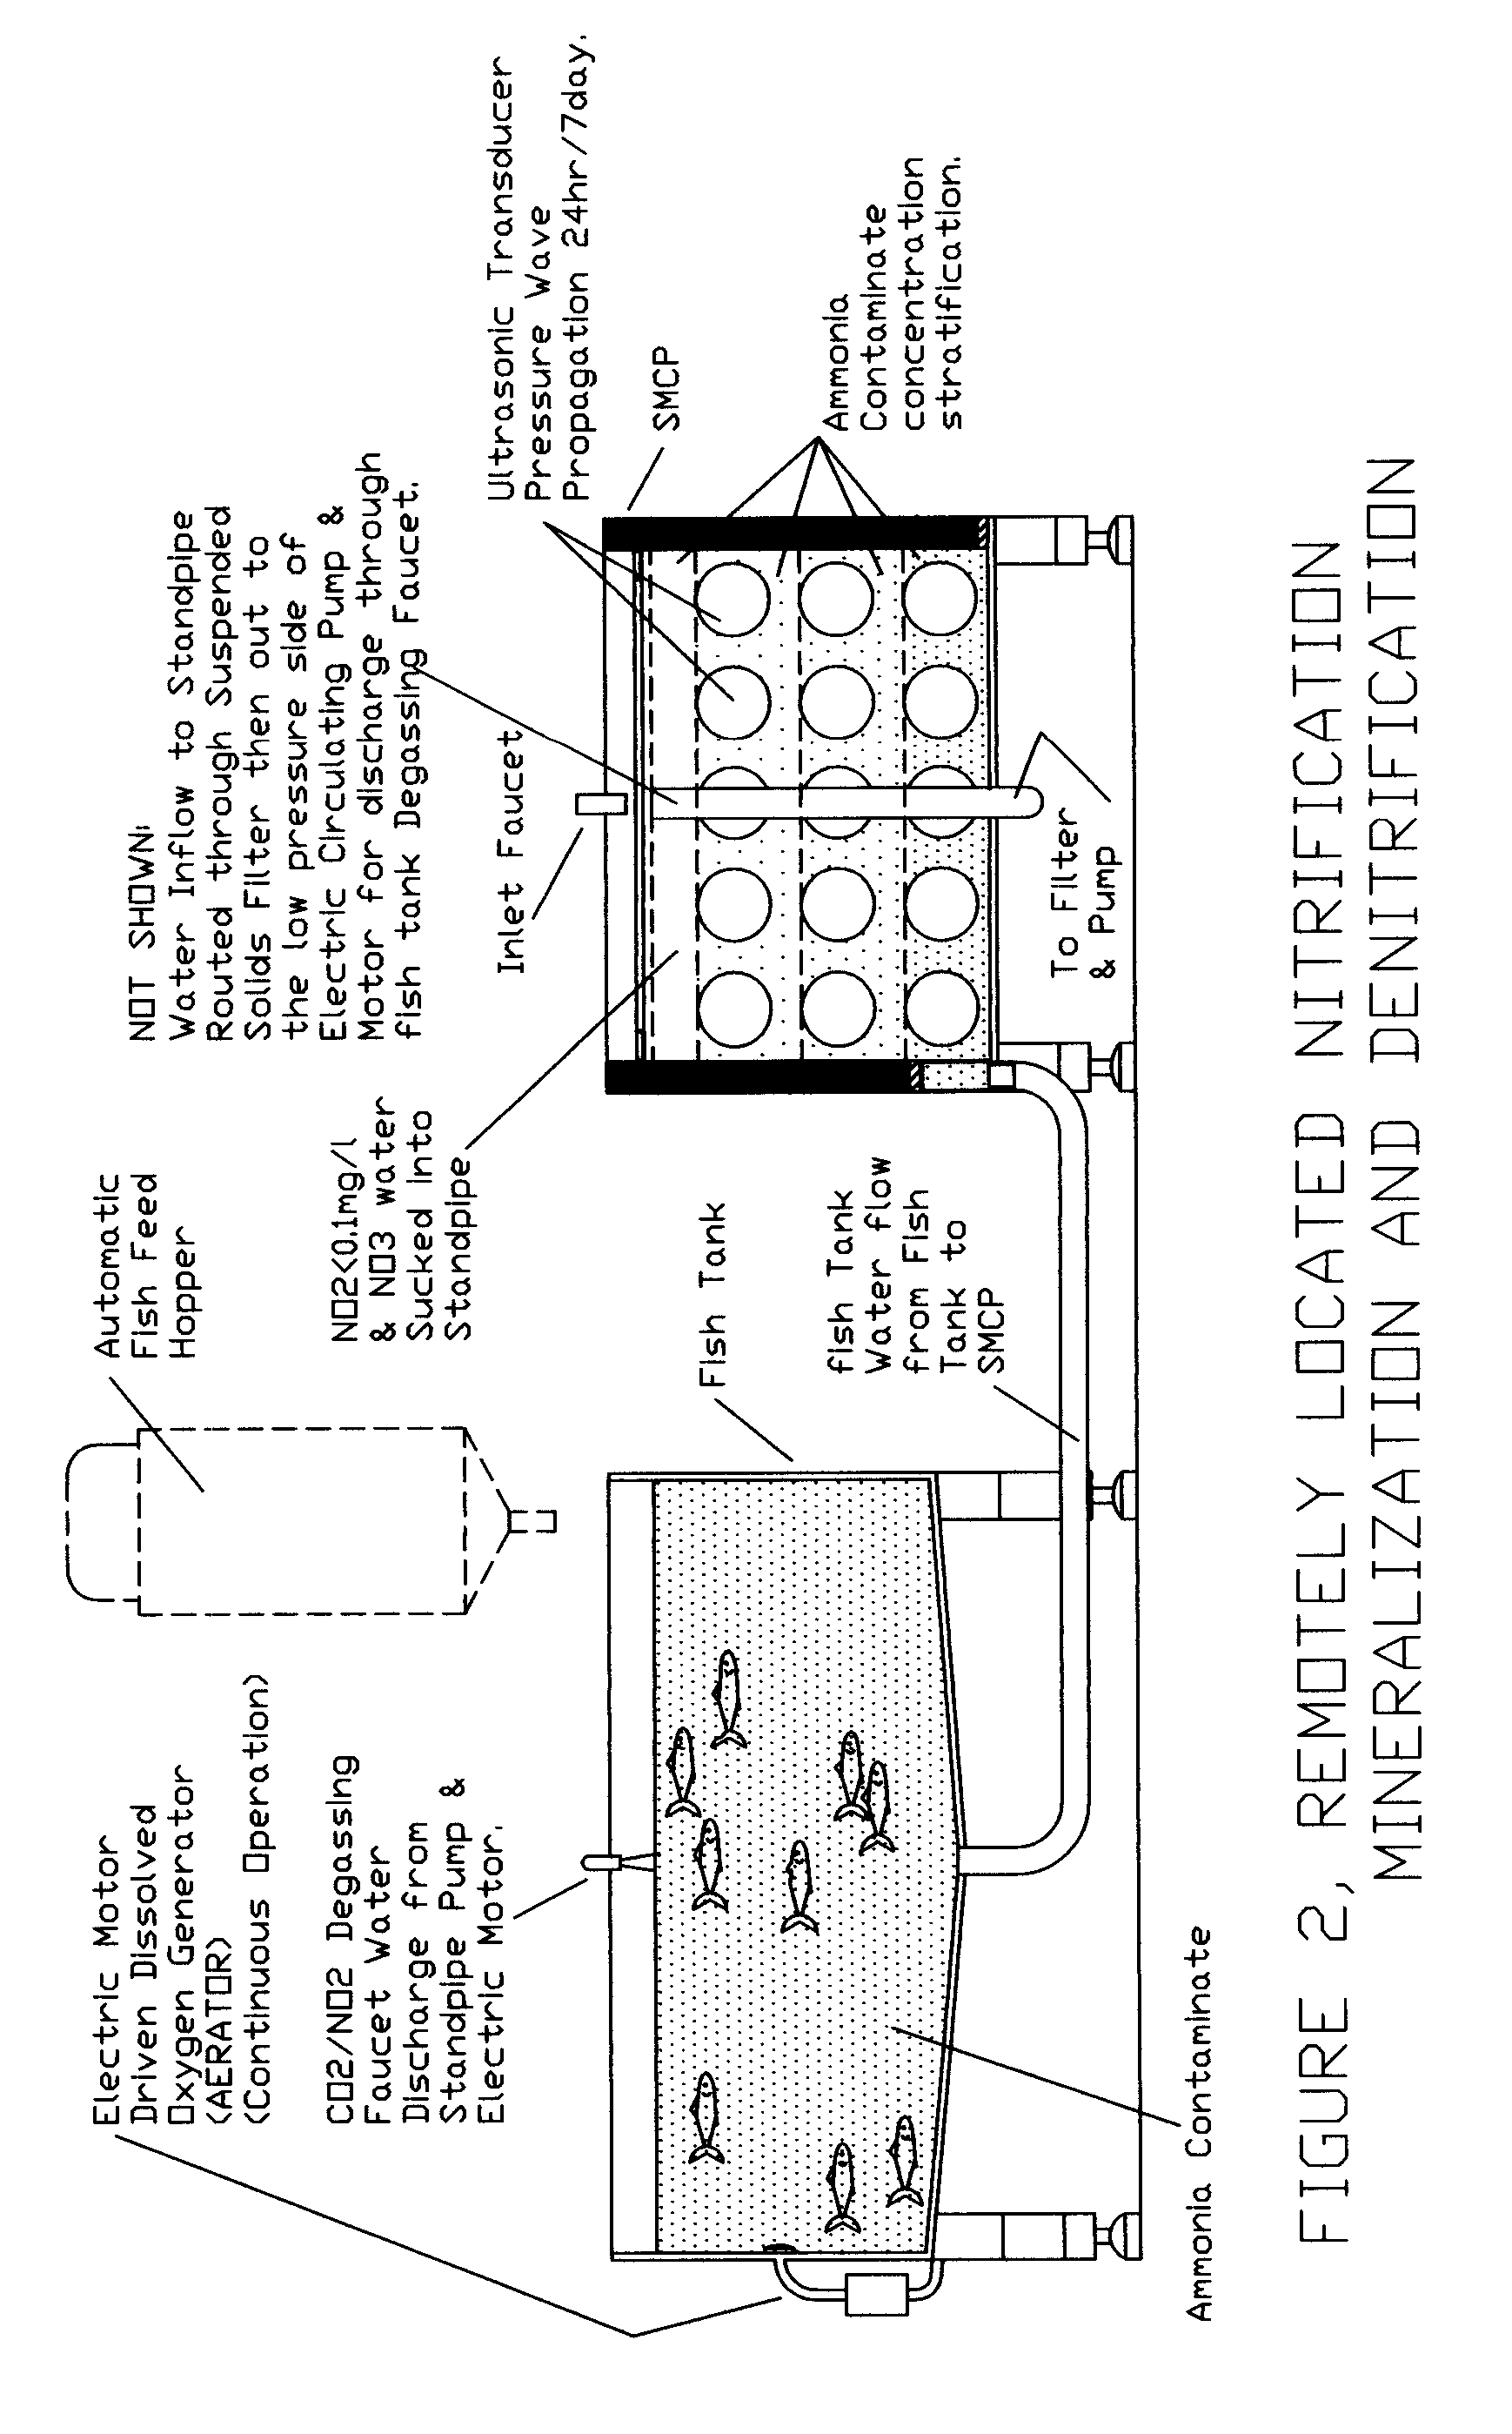 Method and device for removal of ammonia and other contaminants from recirculating aquaculture tanks